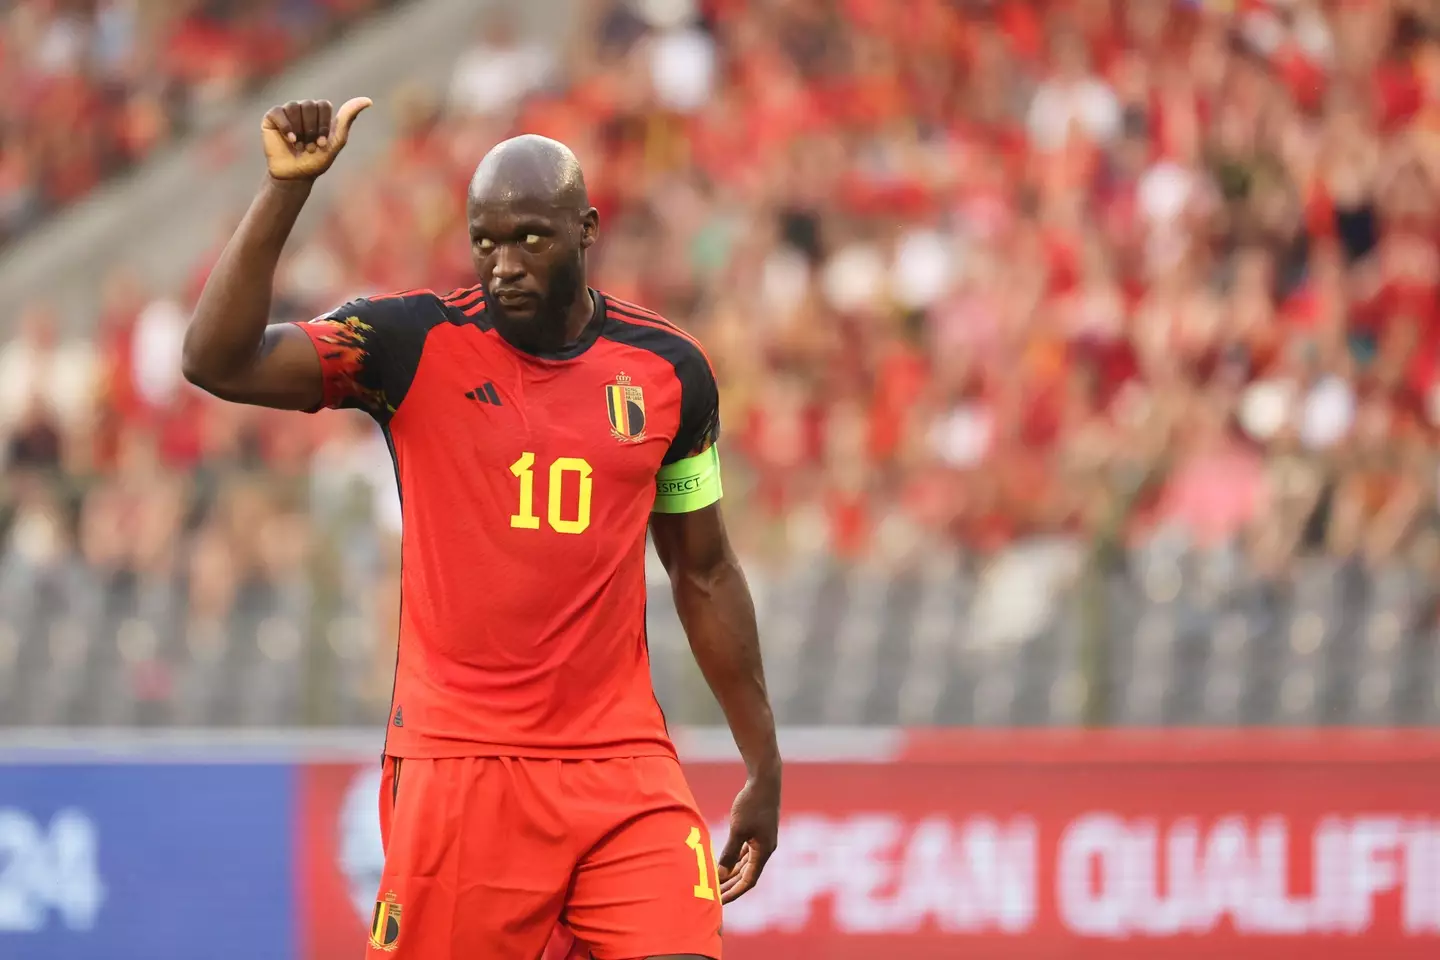 Lukaku was given the honour of being captain on Saturday. Image: Alamy